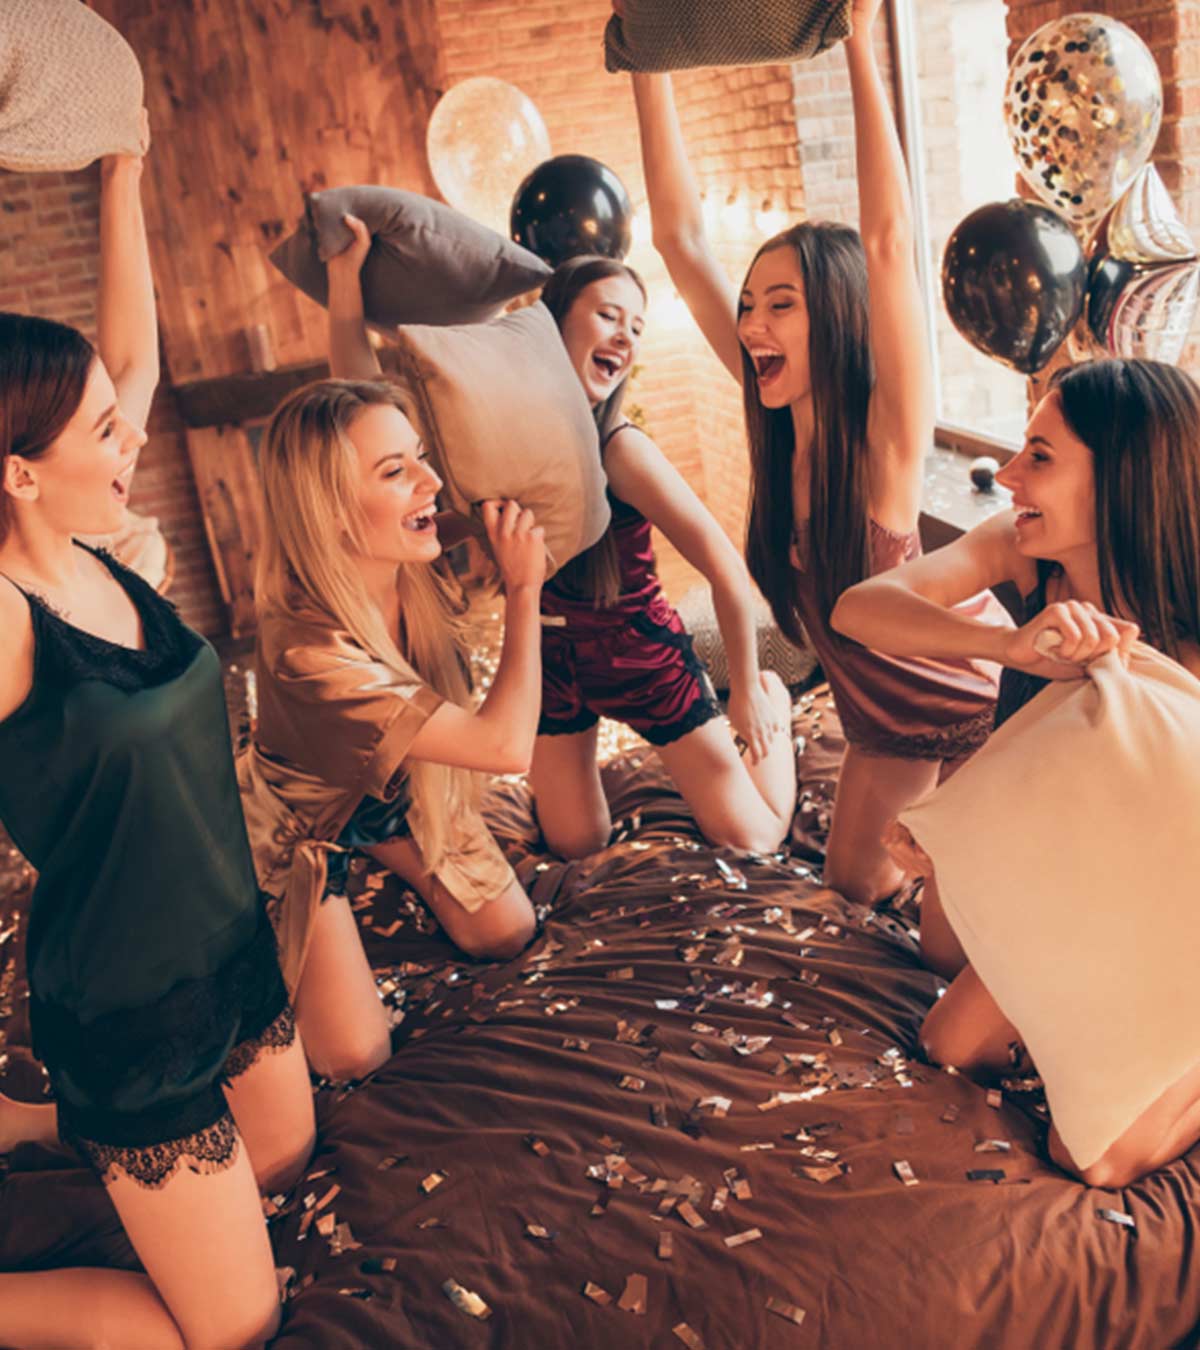 35 Fun And Engaging Kitty Party Games For Ladies To Play